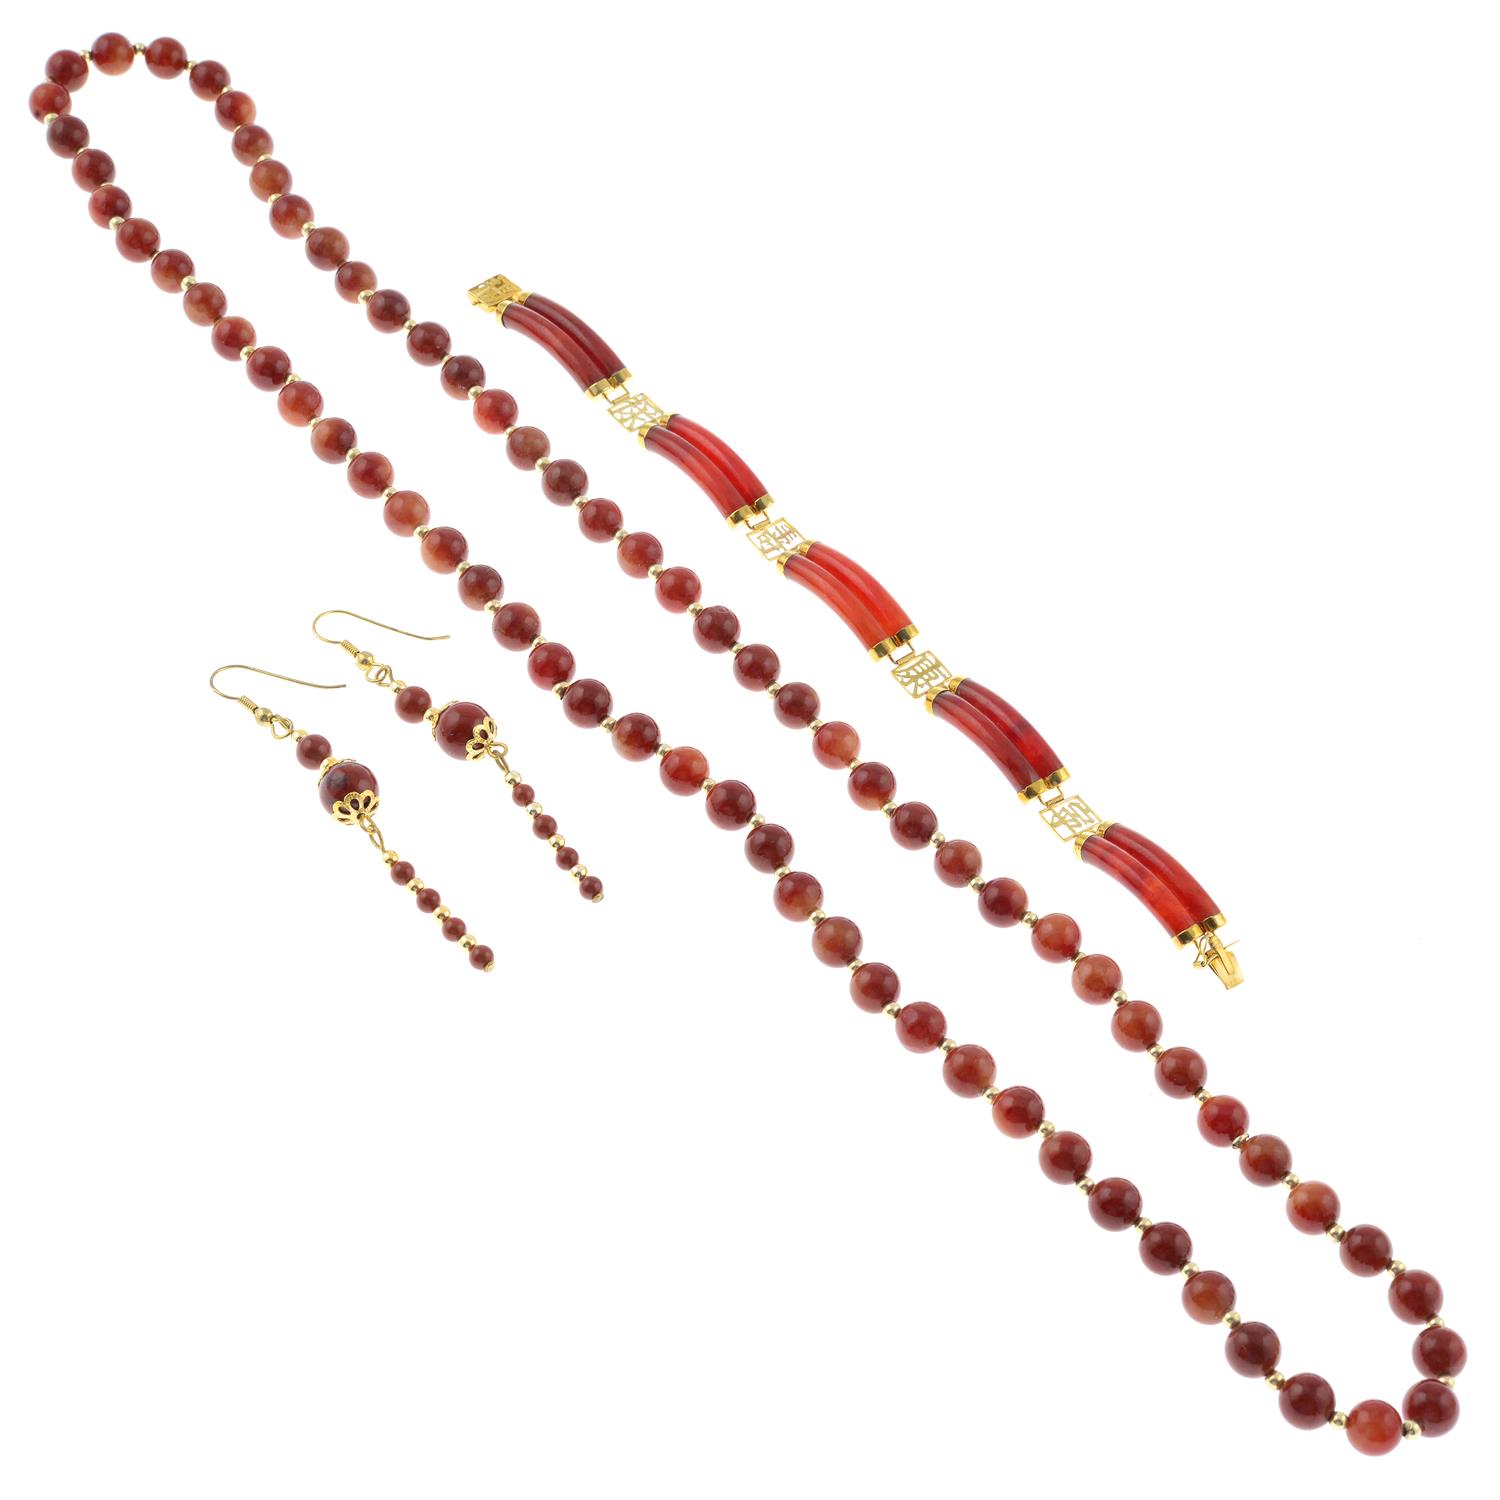 A jasper necklace, with earrings, together with a carnelian panel bracelet.